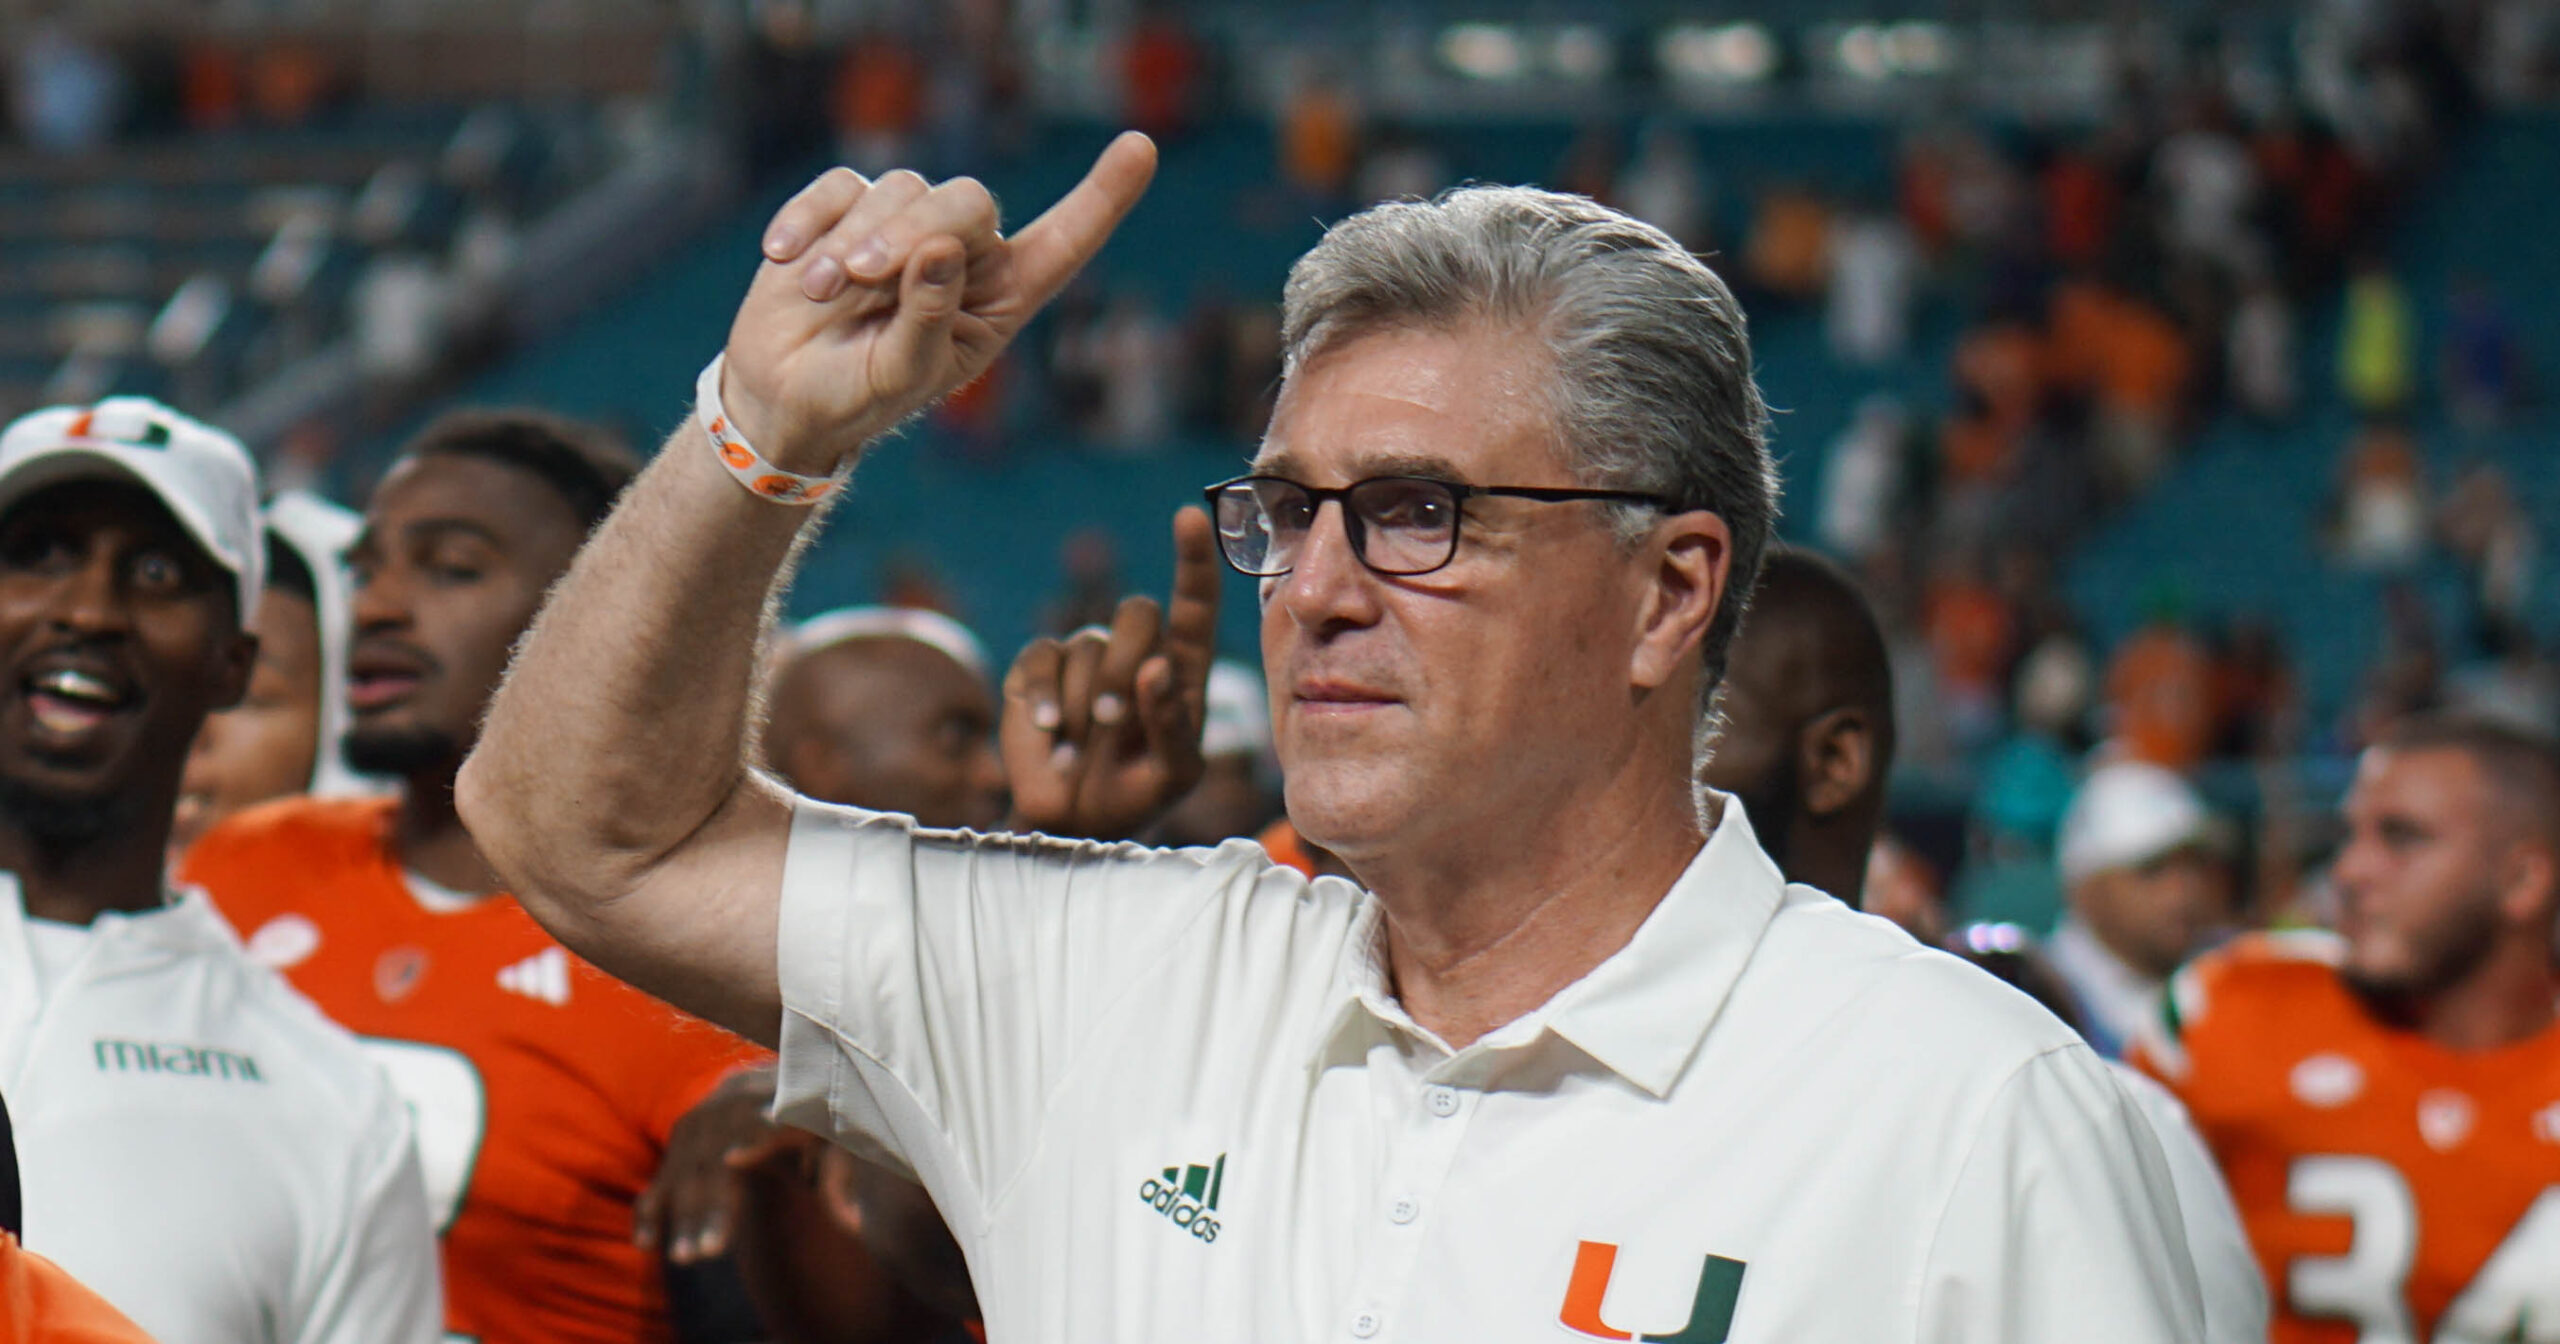 Miami (FL) Hurricanes - News, Schedule, Scores, Roster, and Stats